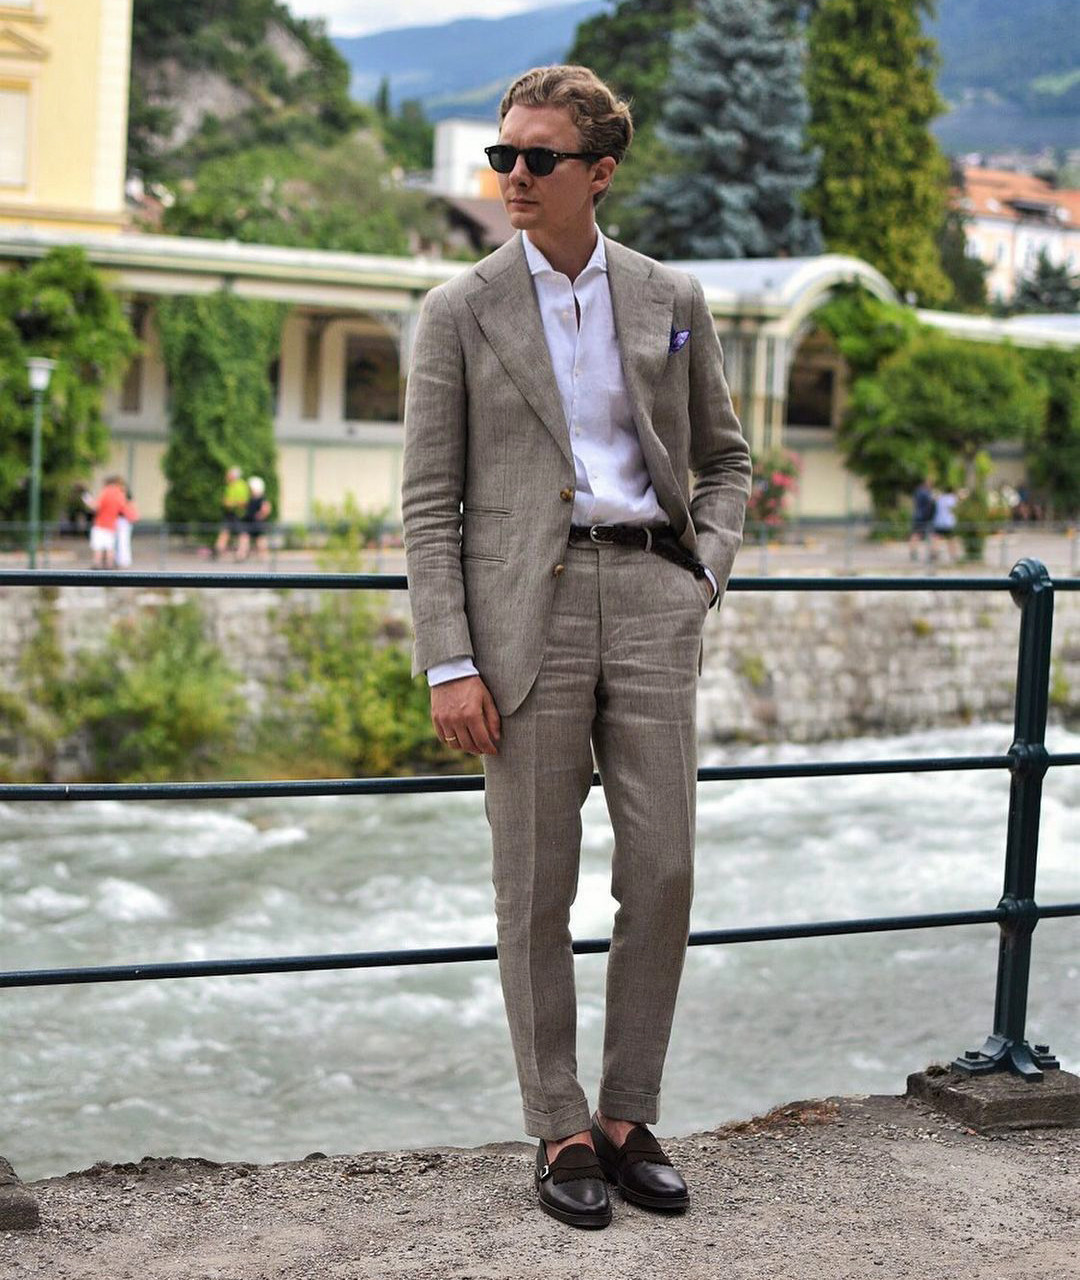 Wearing black belt and black loafer shoes with a tan suit